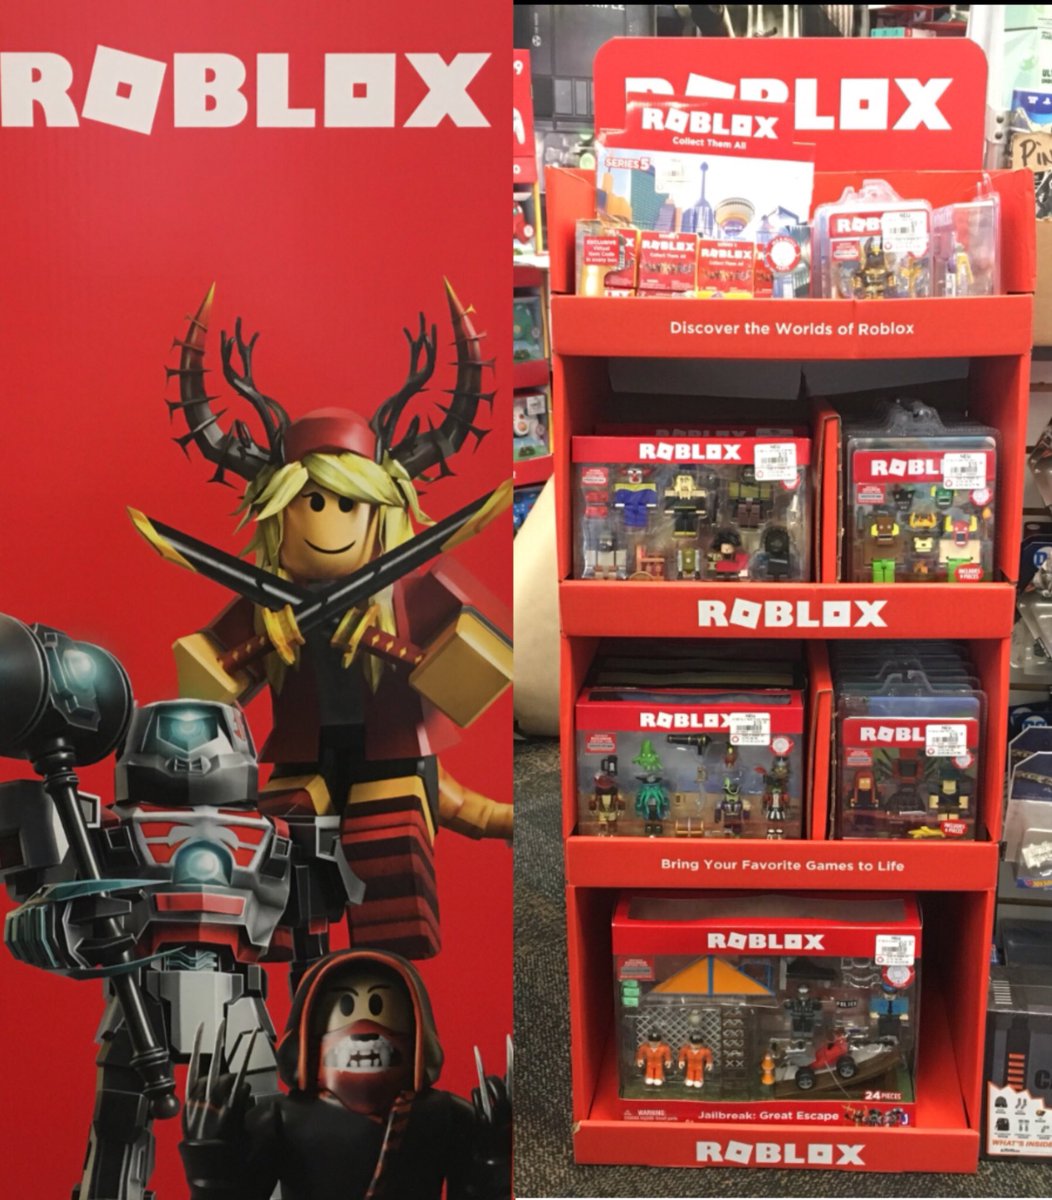 Lily On Twitter Gamestops Have A Special Roblox Display With The - the roblox werewolf animation